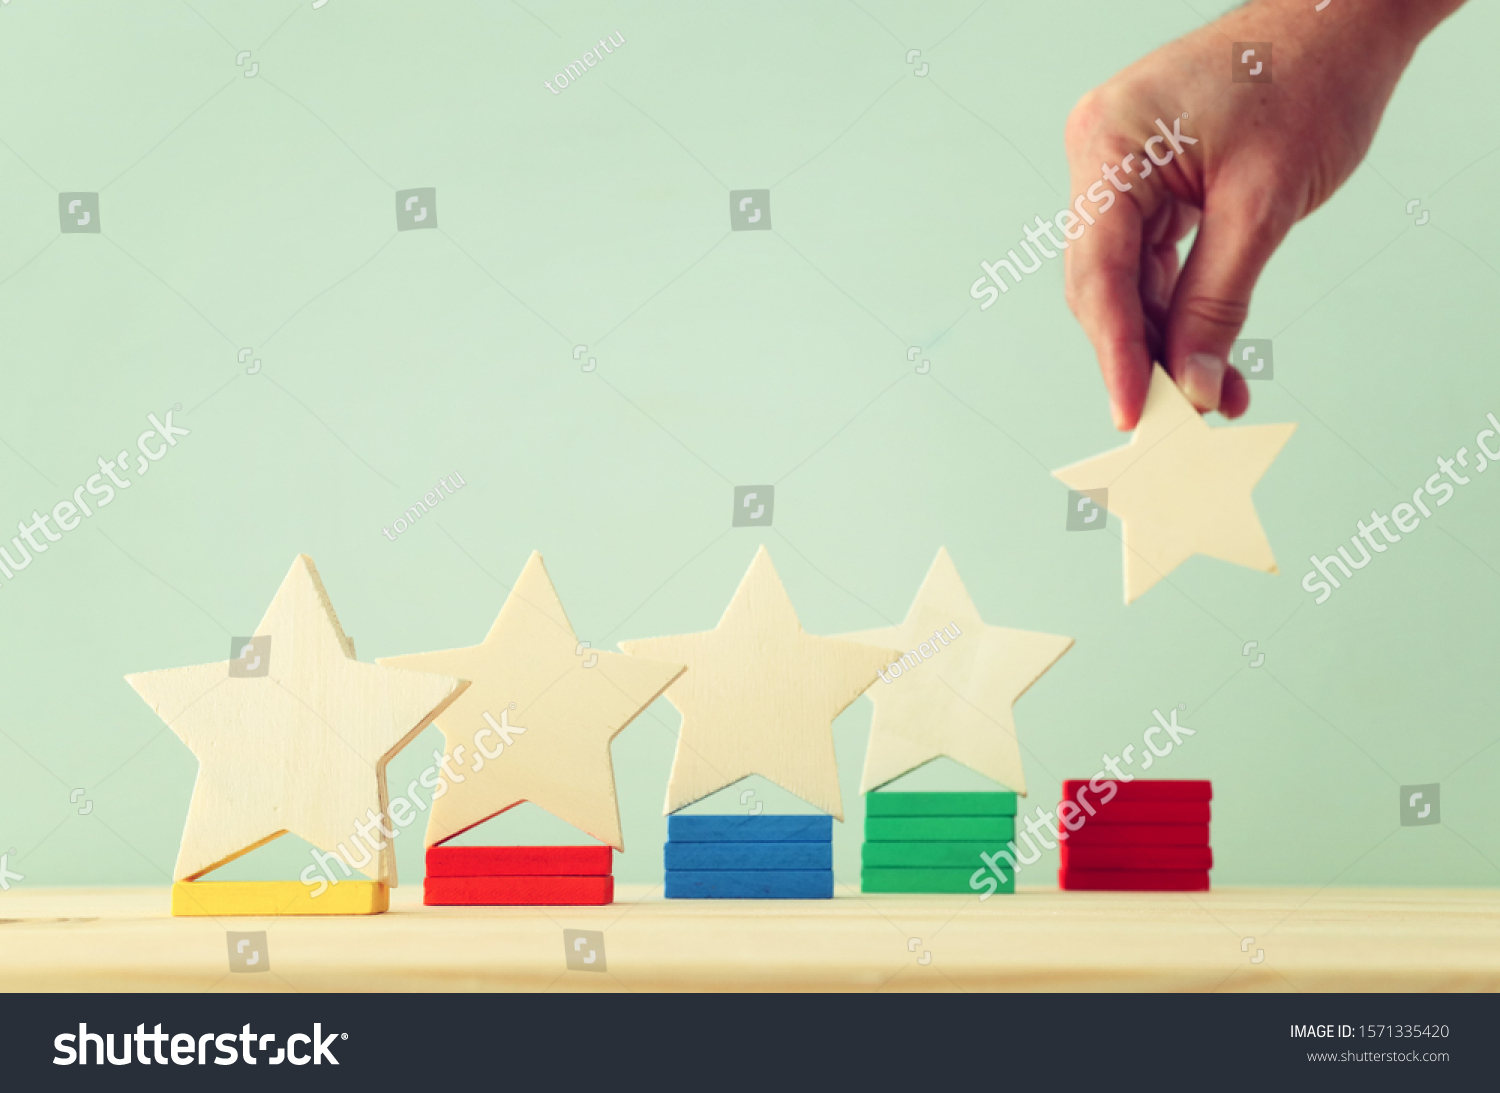 business concept image of setting a five star goal. increase rating or ranking, evaluation and classification idea #1571335420